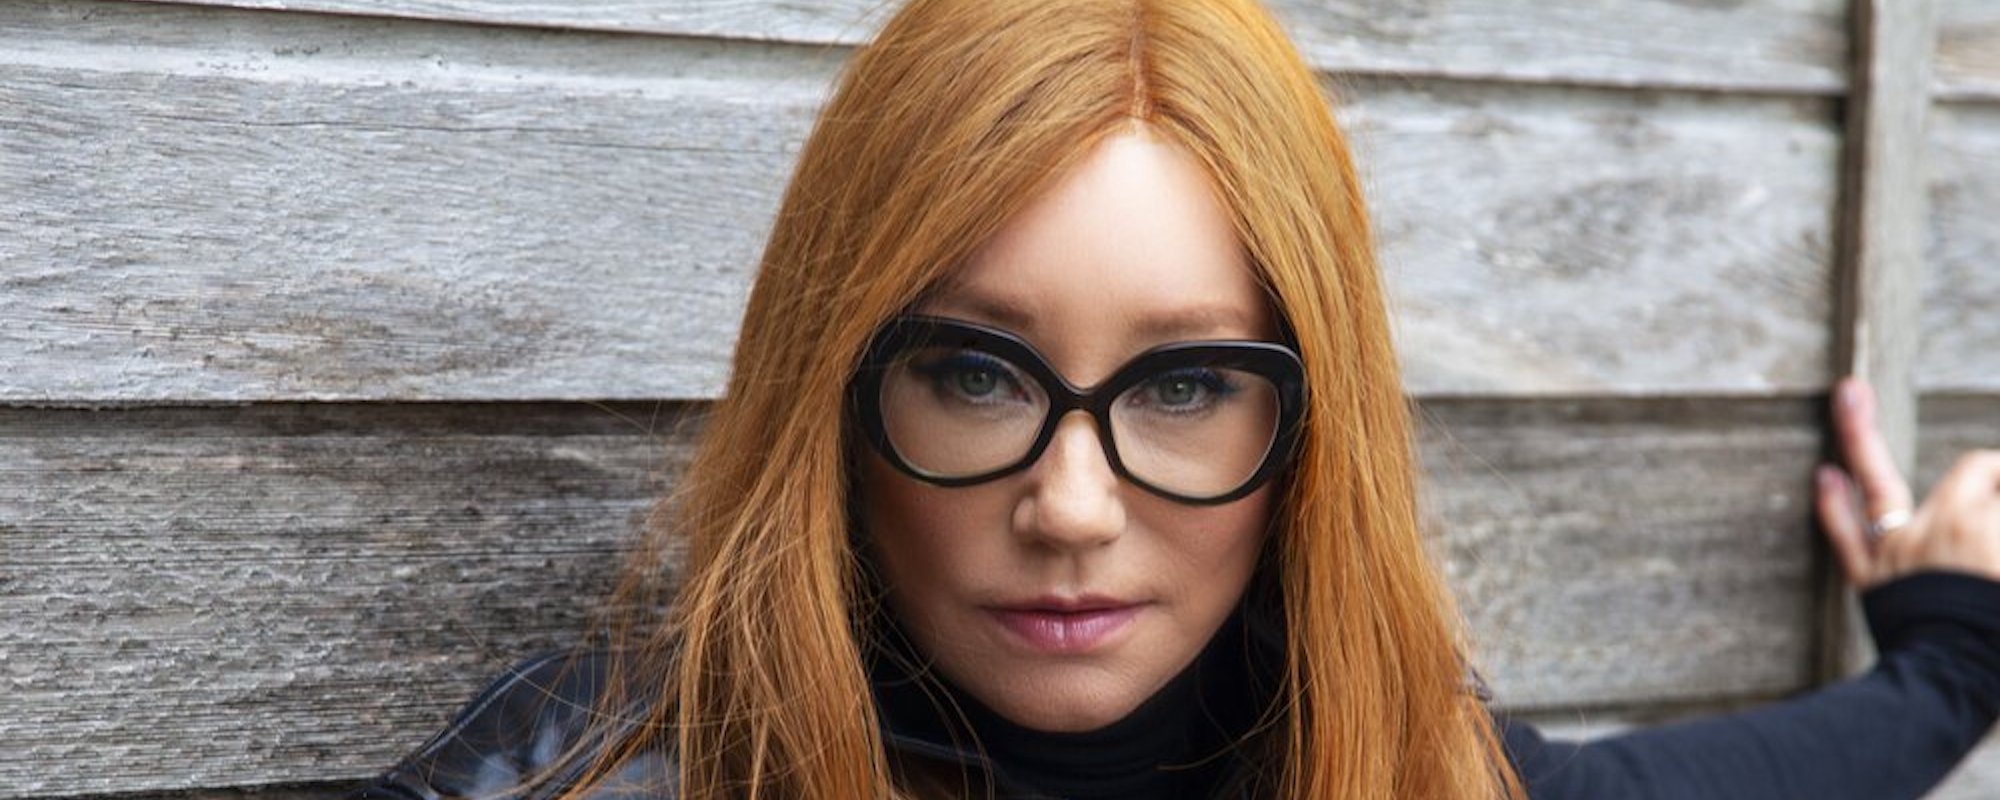 Tori Amos Commemorates 30th Anniversary of Debut with Graphic Novel Written by Neil Gaiman, Margaret Atwood and More